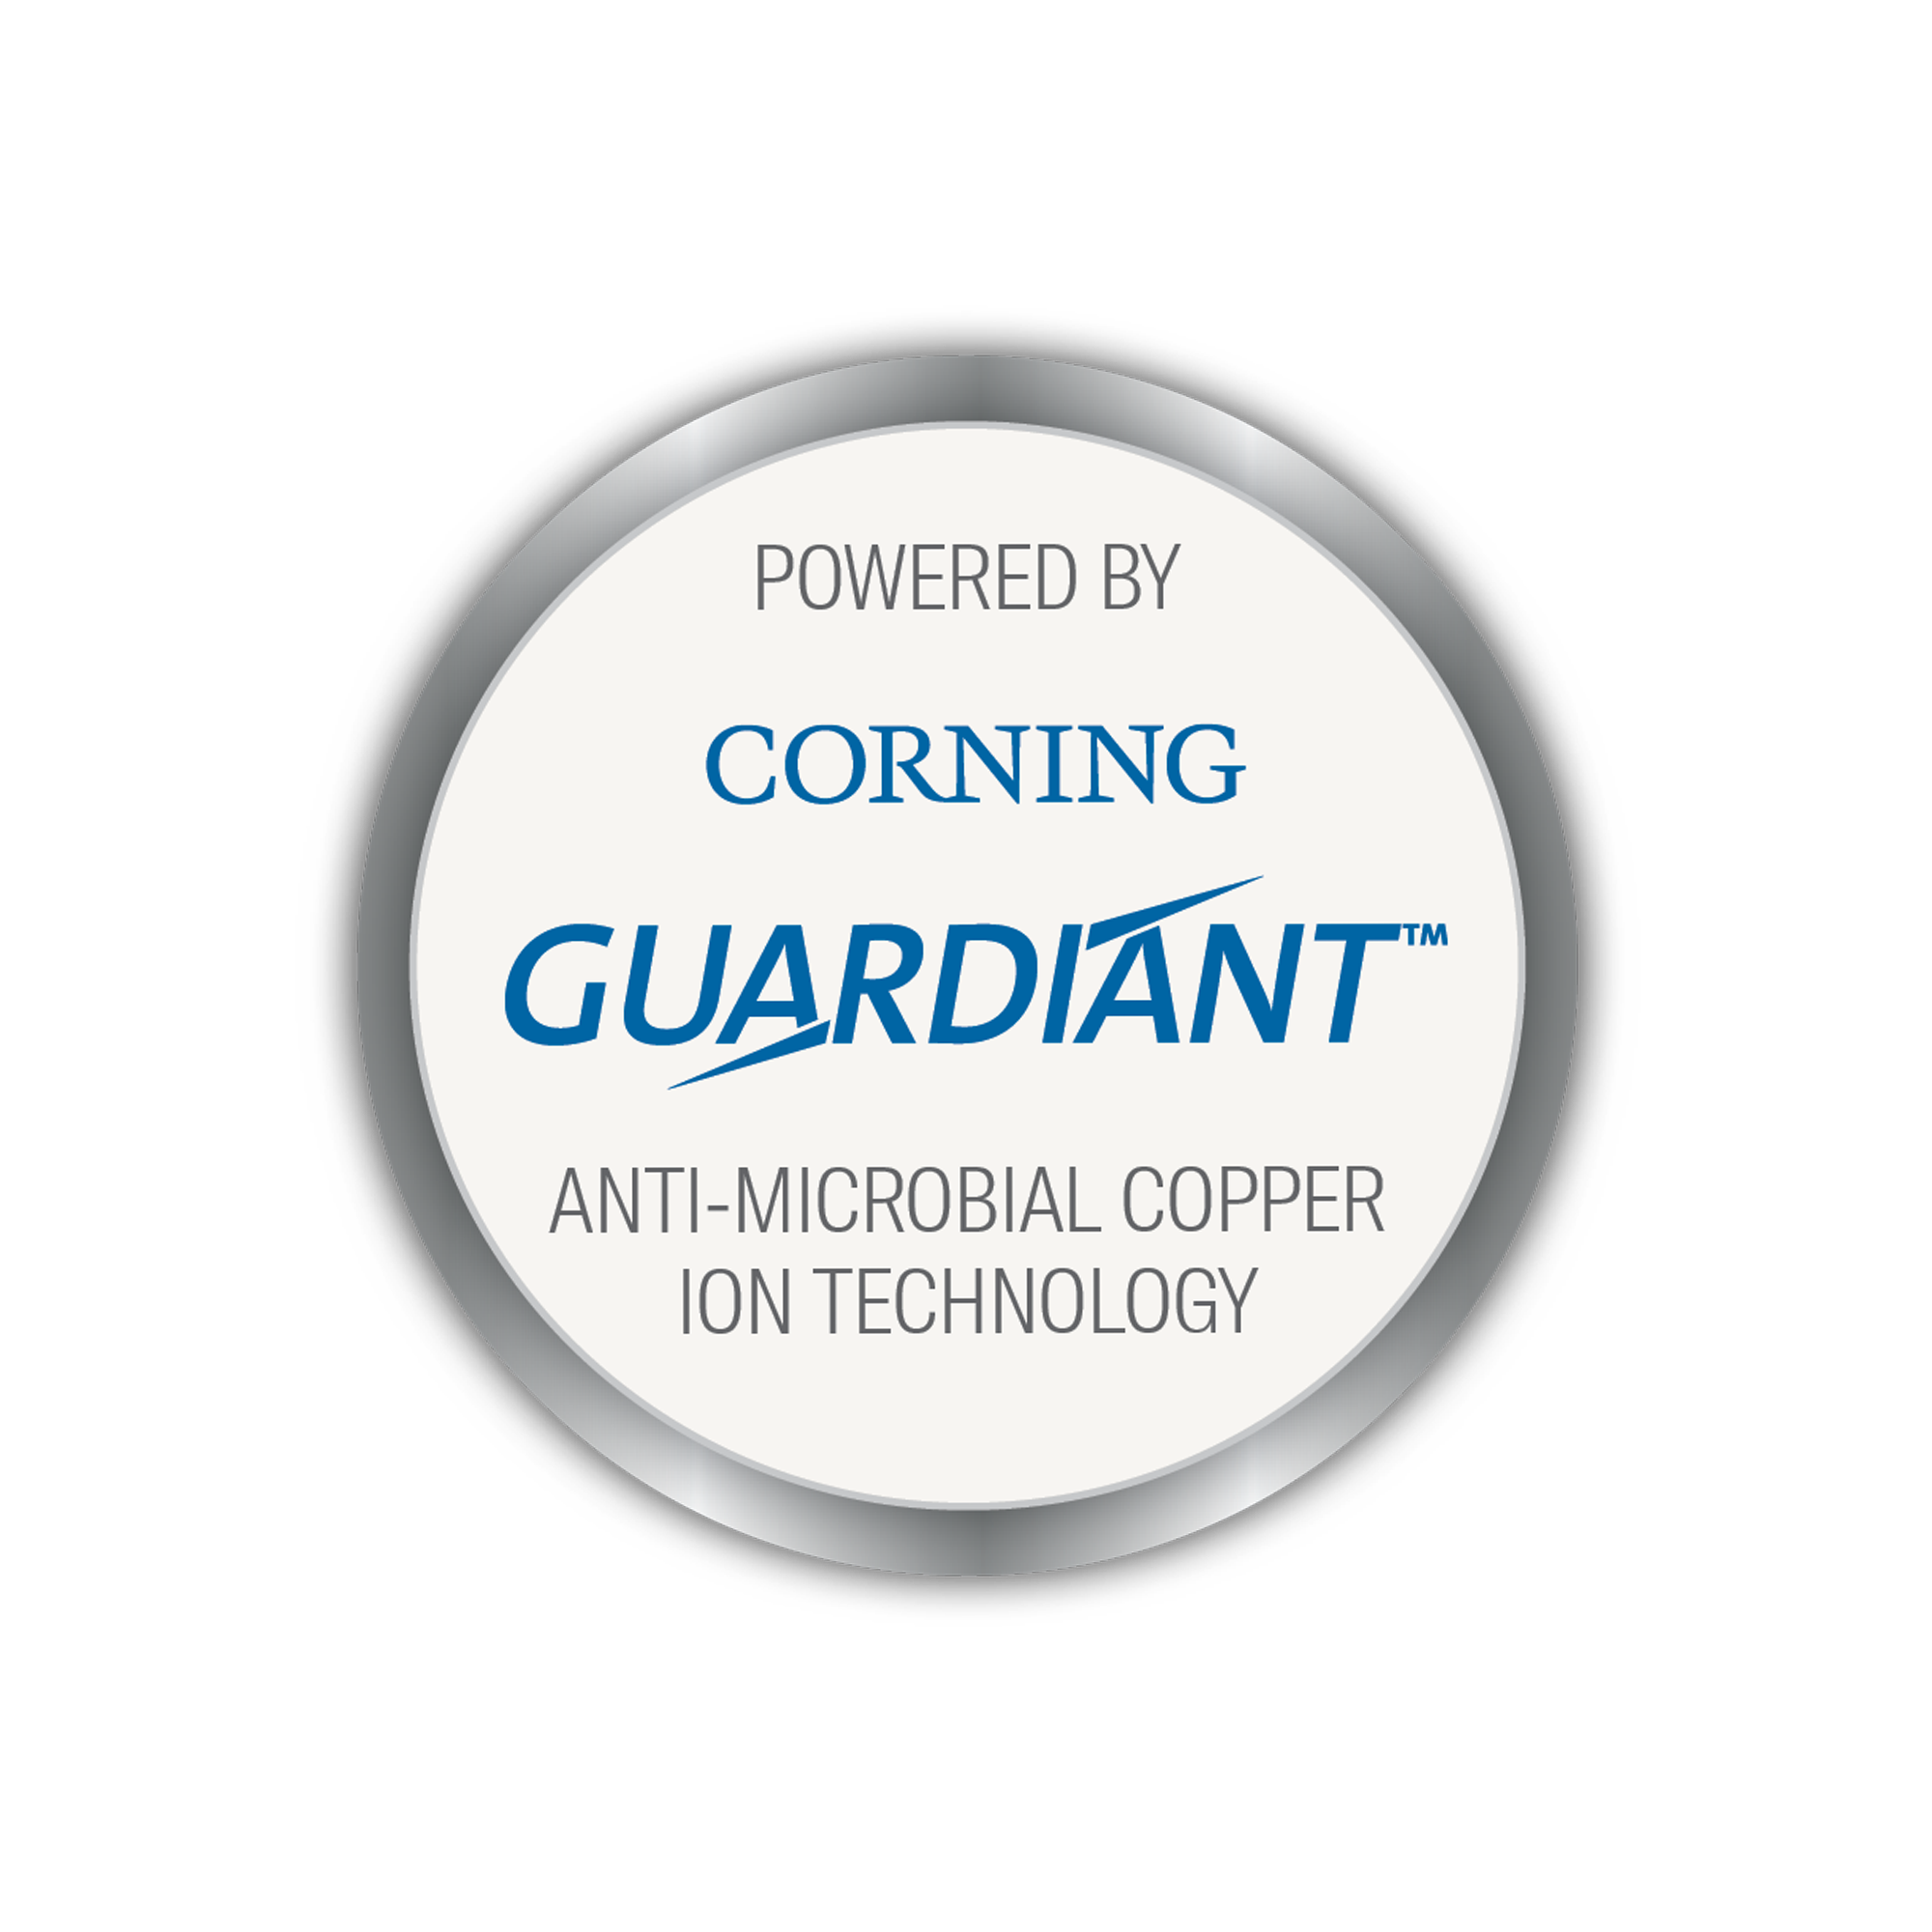 Reviews for COPPER ARMOR 1 gal. PPG1101-3 Stylish Semi-Gloss Antiviral and  Antibacterial Interior Paint with Primer